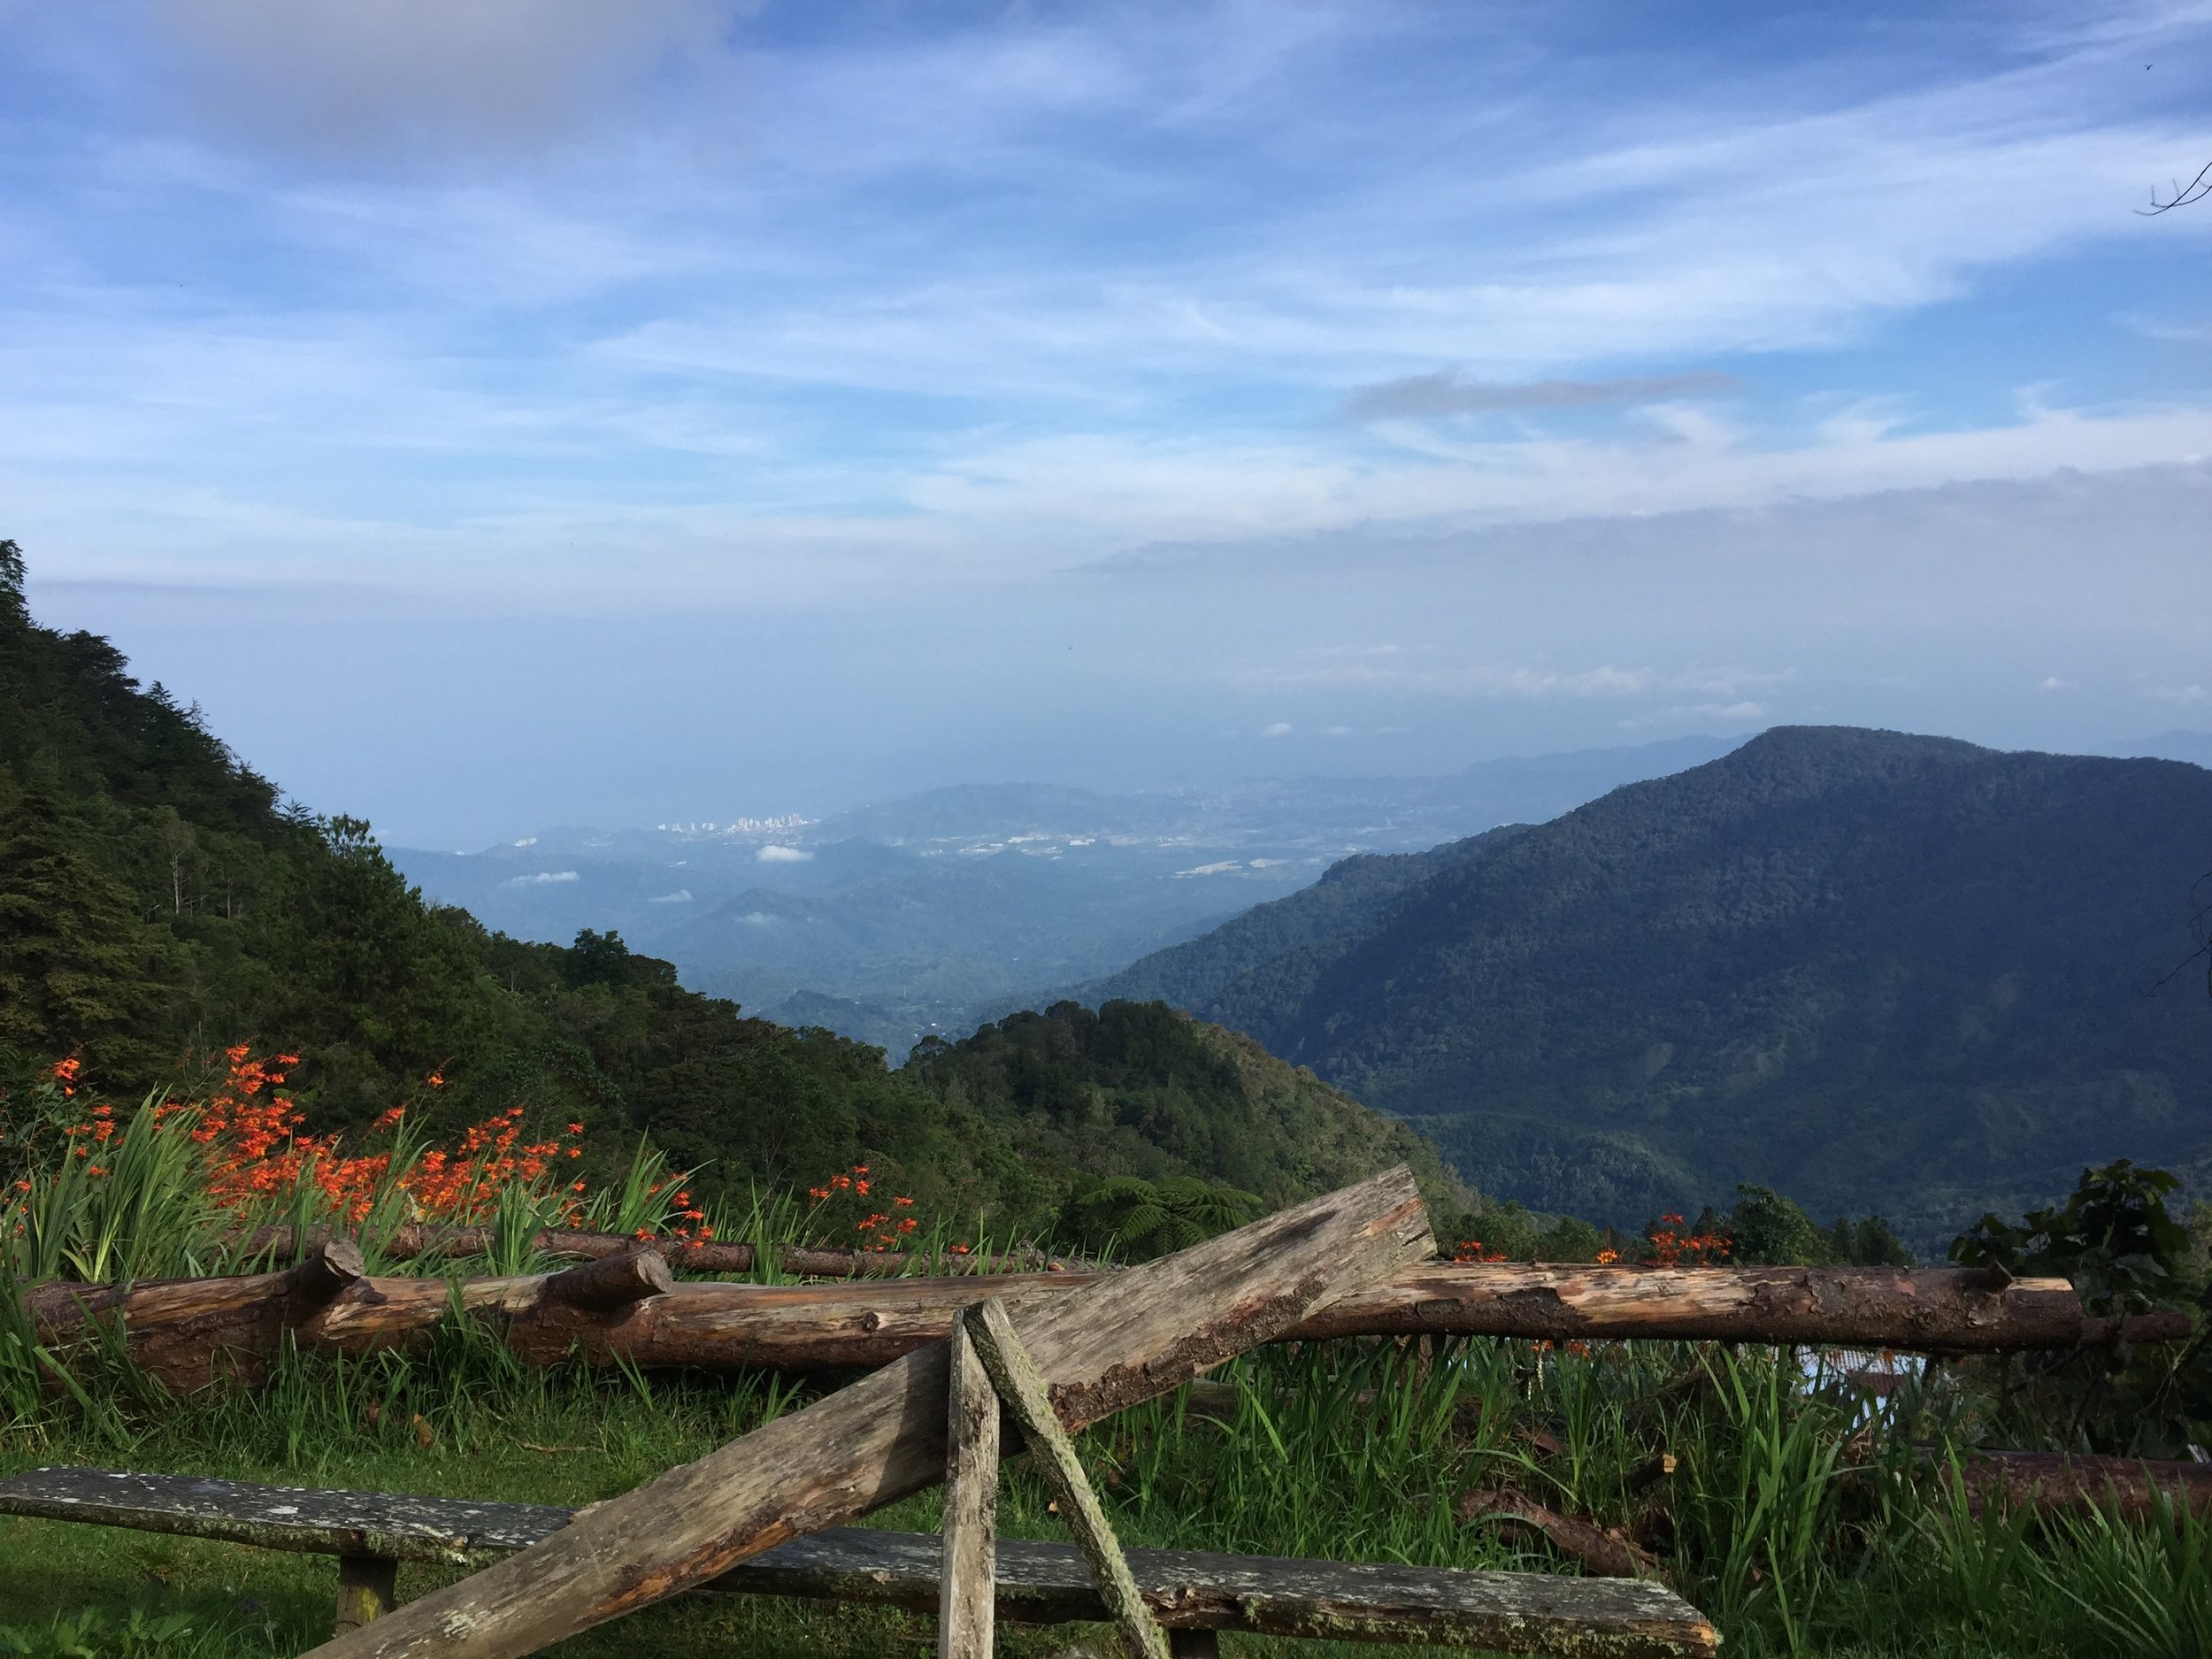   CERRO KENNEDY, COLOMBIA – JULY 28TH, 2017: The view from 8000 feet above sea level, just outside the gate to the San Lorenzo weather monitoring station. The city of Santa Marta sits in the distance where I arrived by plane three days prior.  